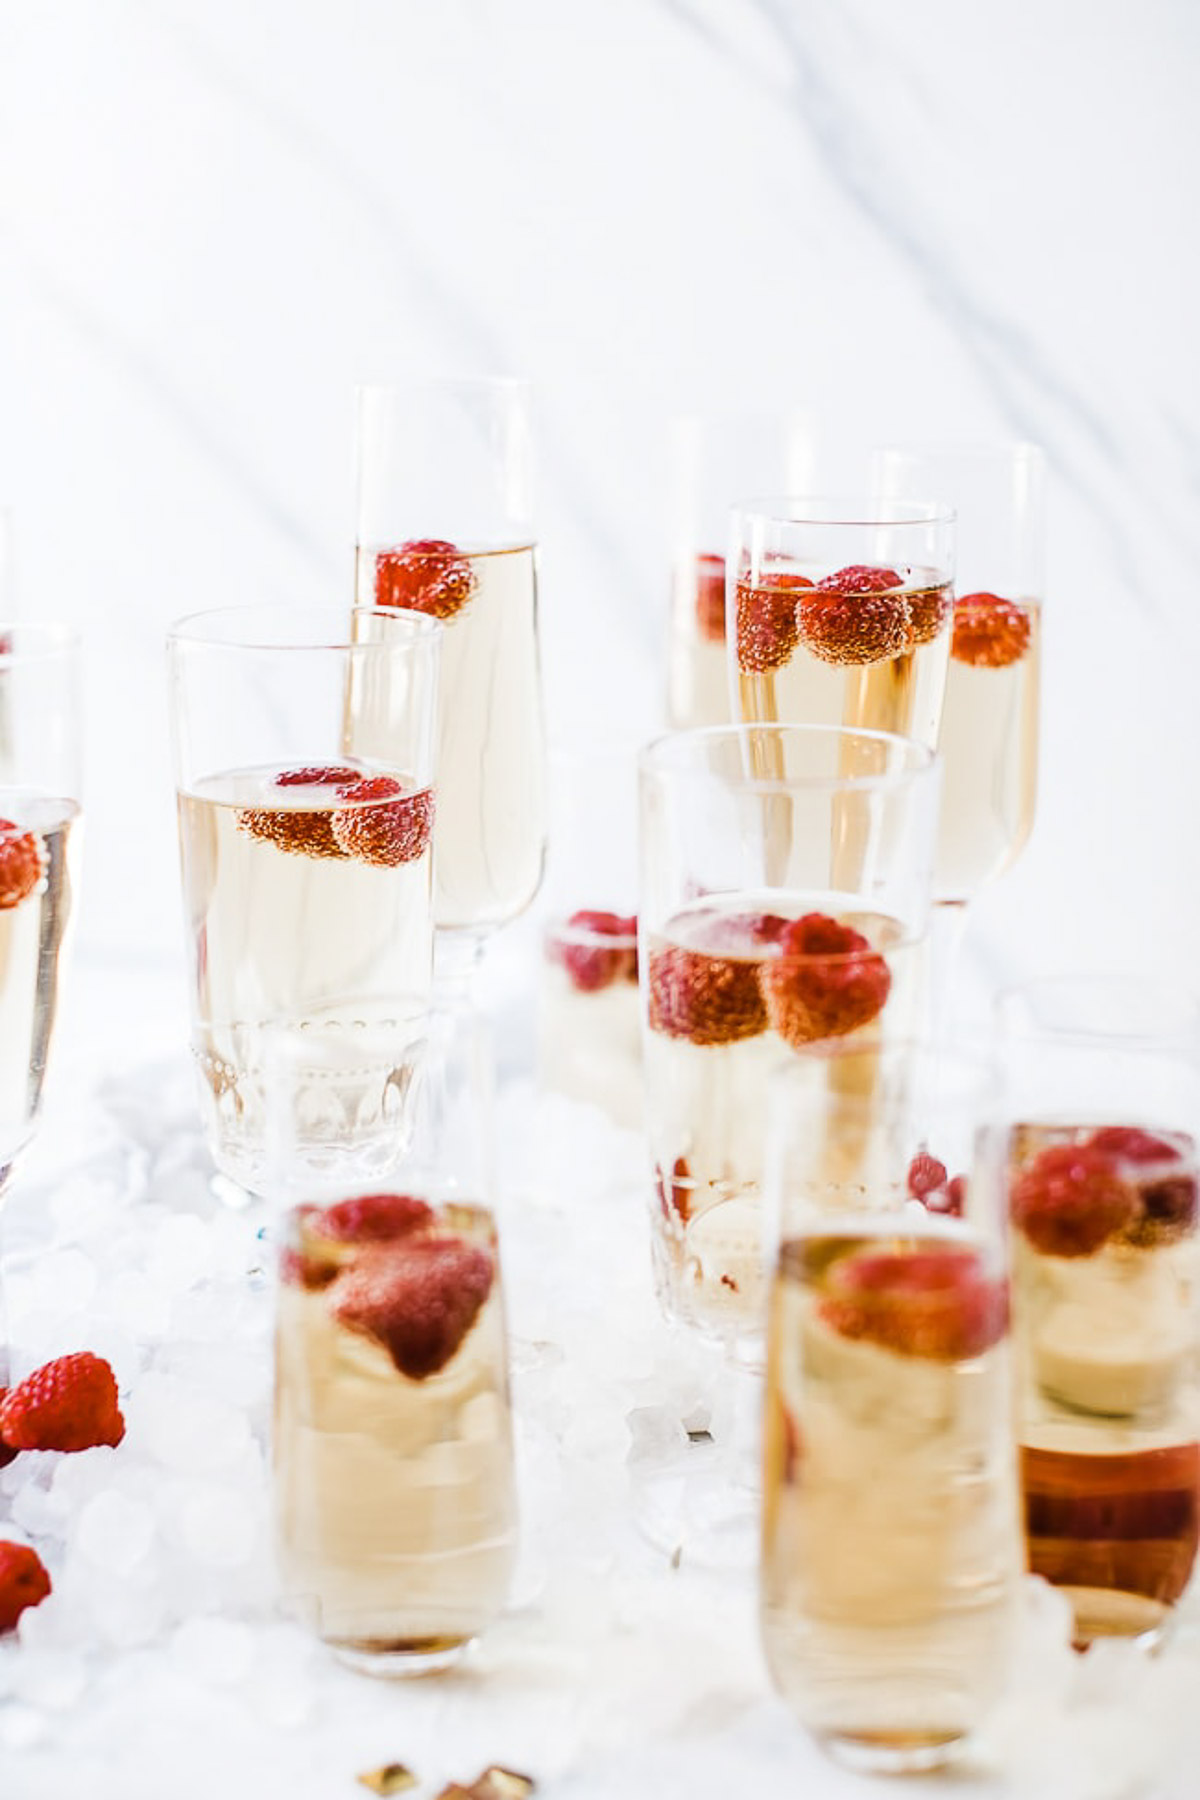 Glasses of nonalcoholic sparkling wine in flutes with raspberries.